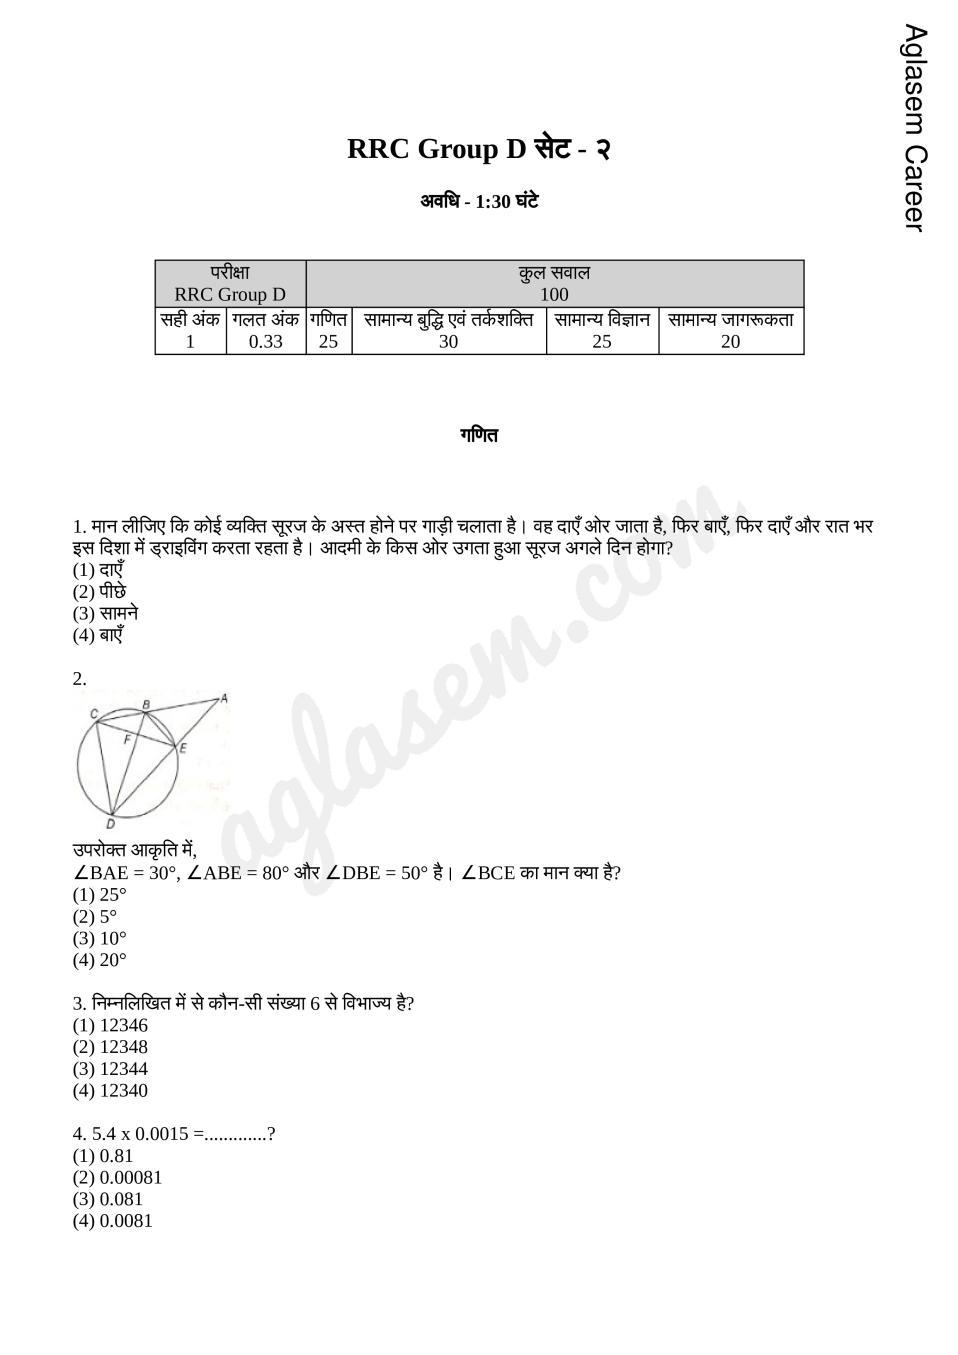 railway related question in hindi